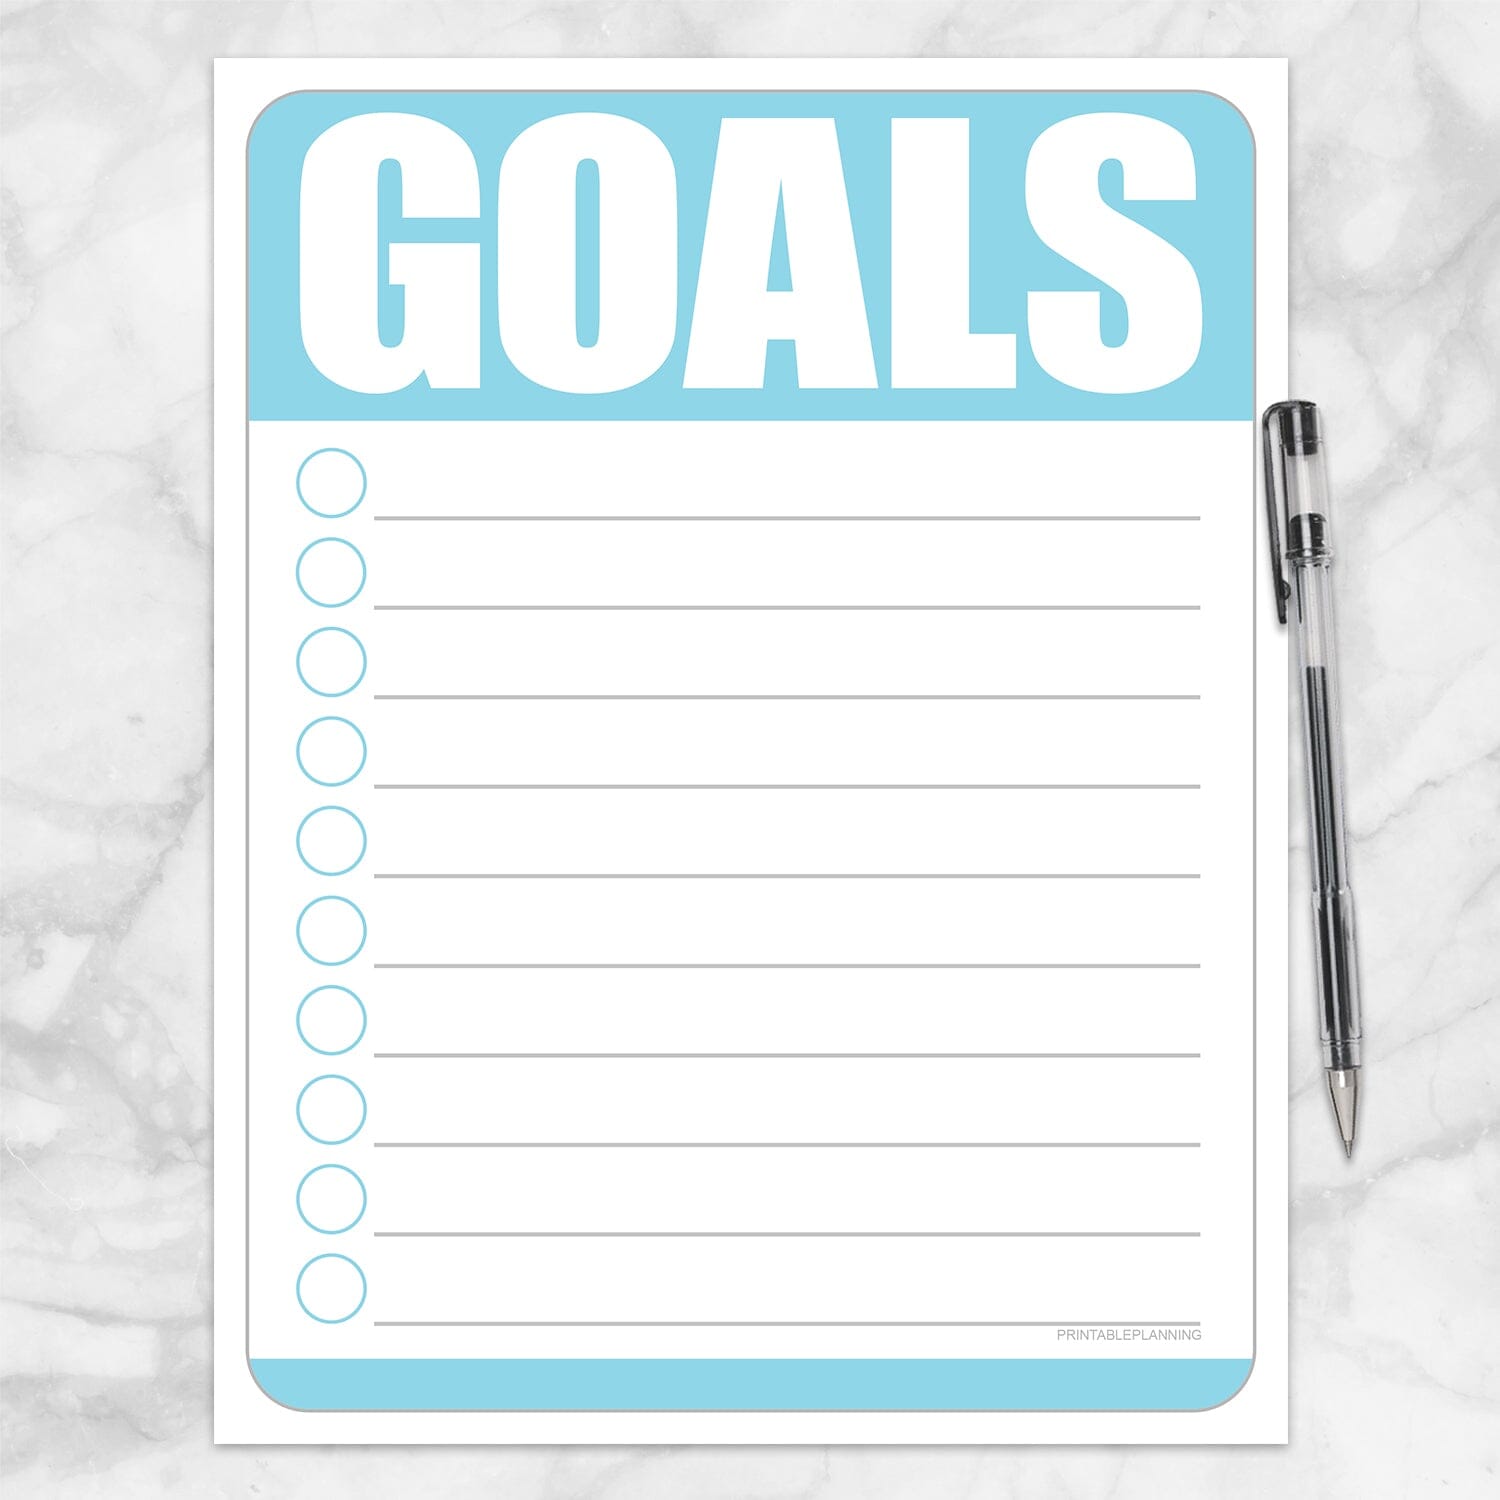 Printable Goals - Blue Full Page Checklist at Printable Planning.